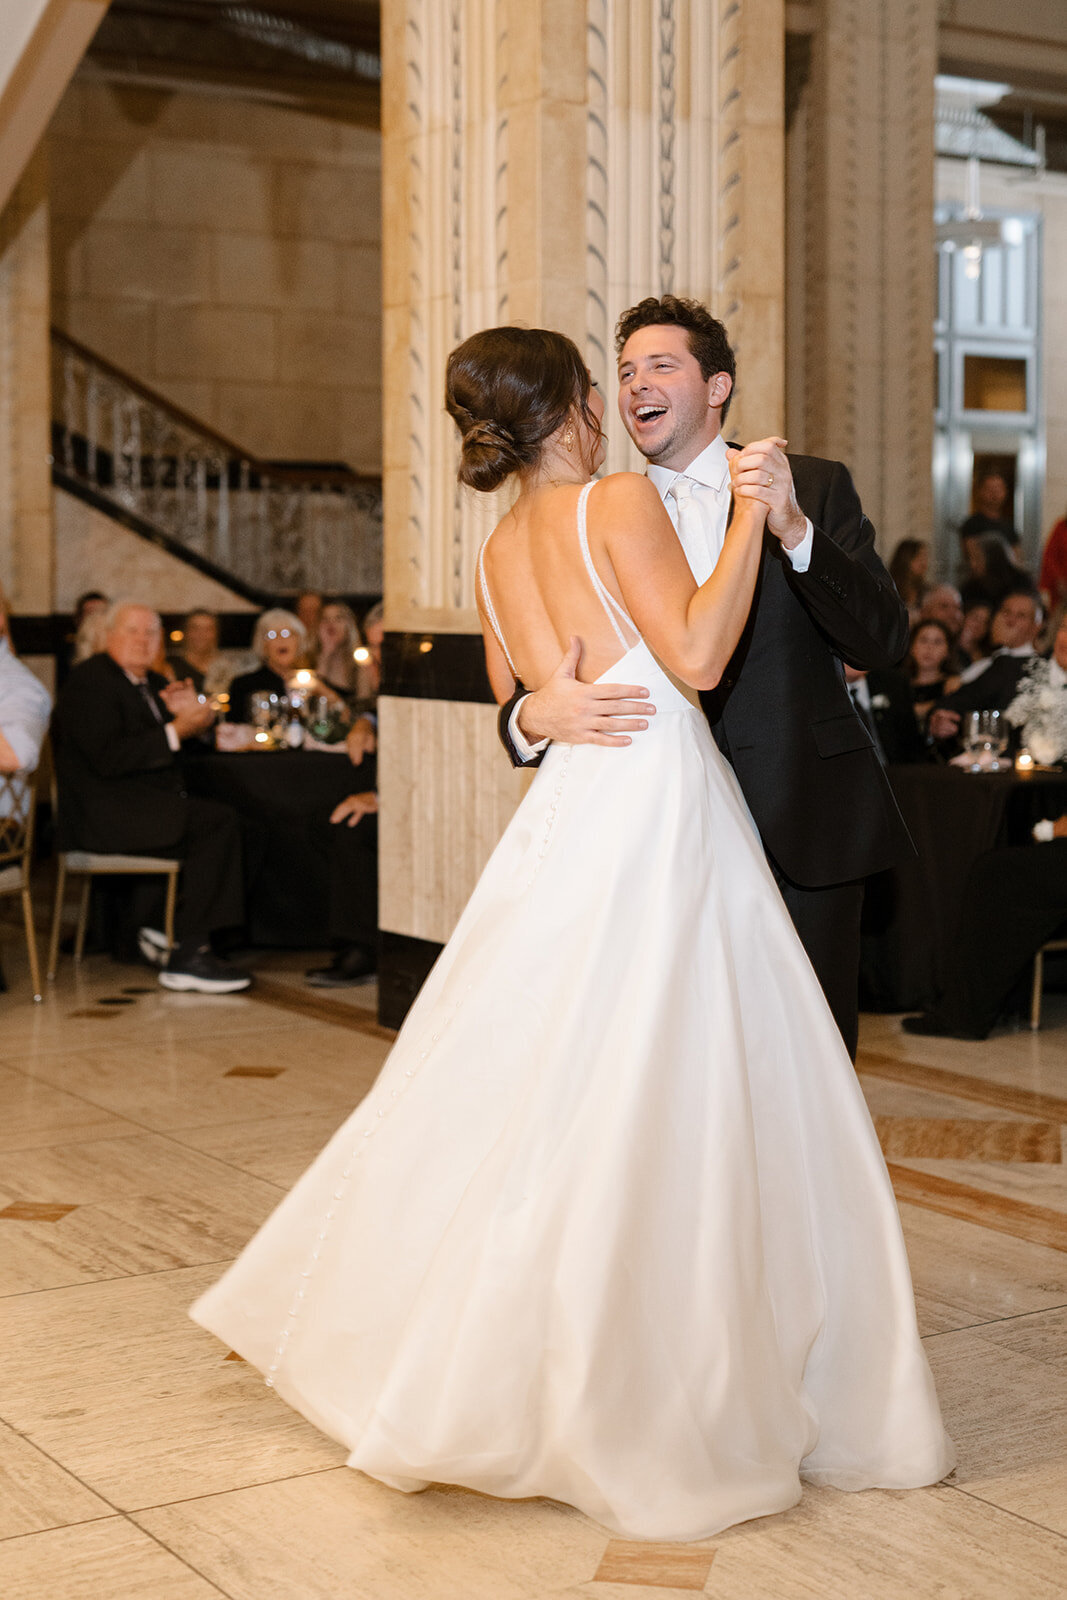 Kylie and Jack at The Grand Hall - Kansas City Wedding Photograpy - Nick and Lexie Photo Film-916